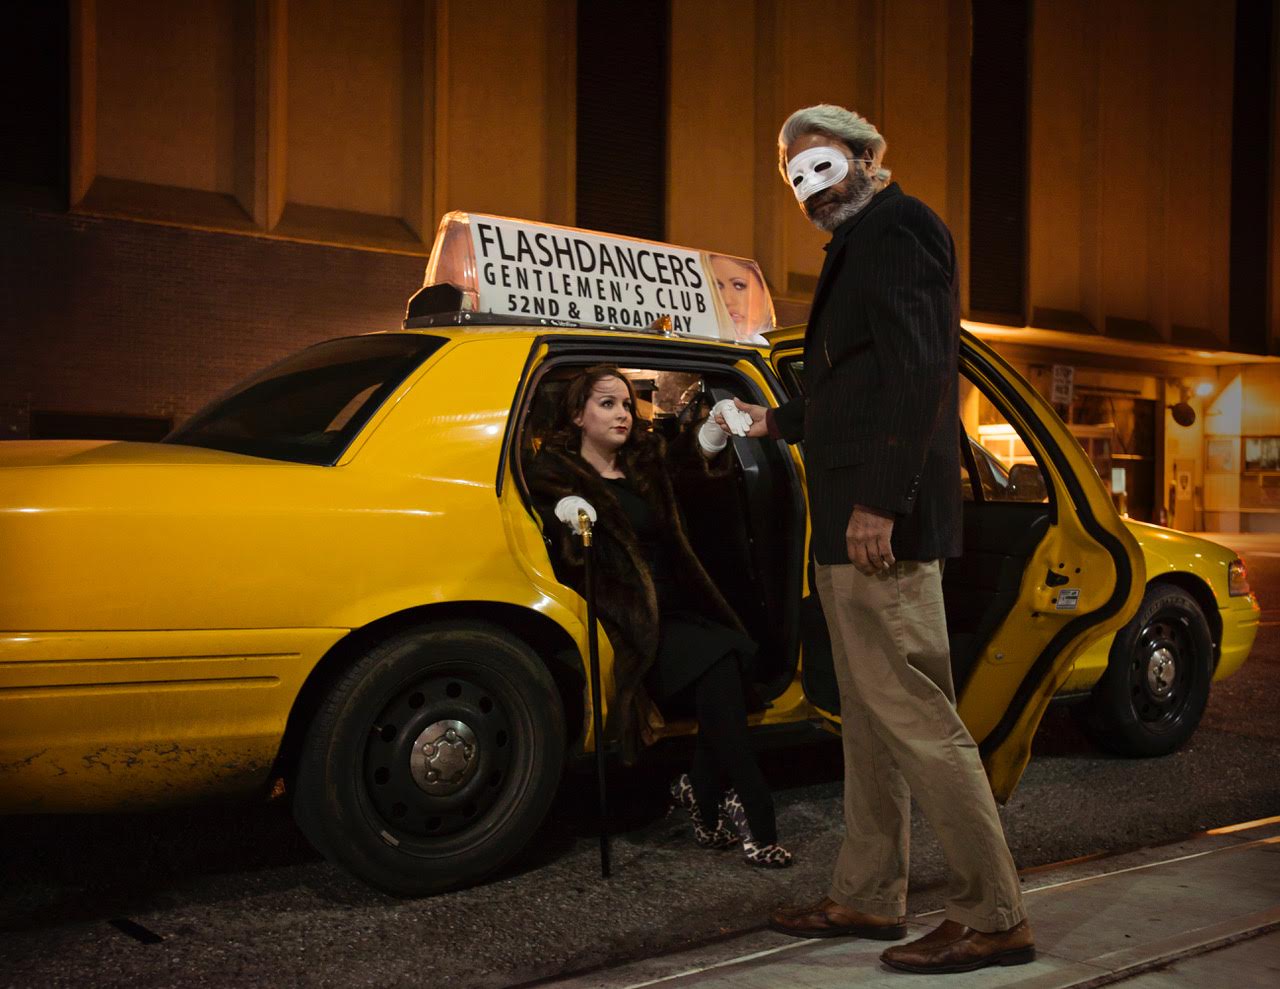 Photography: New York’s Taxi Drivers are now Calendar Pin-ups!